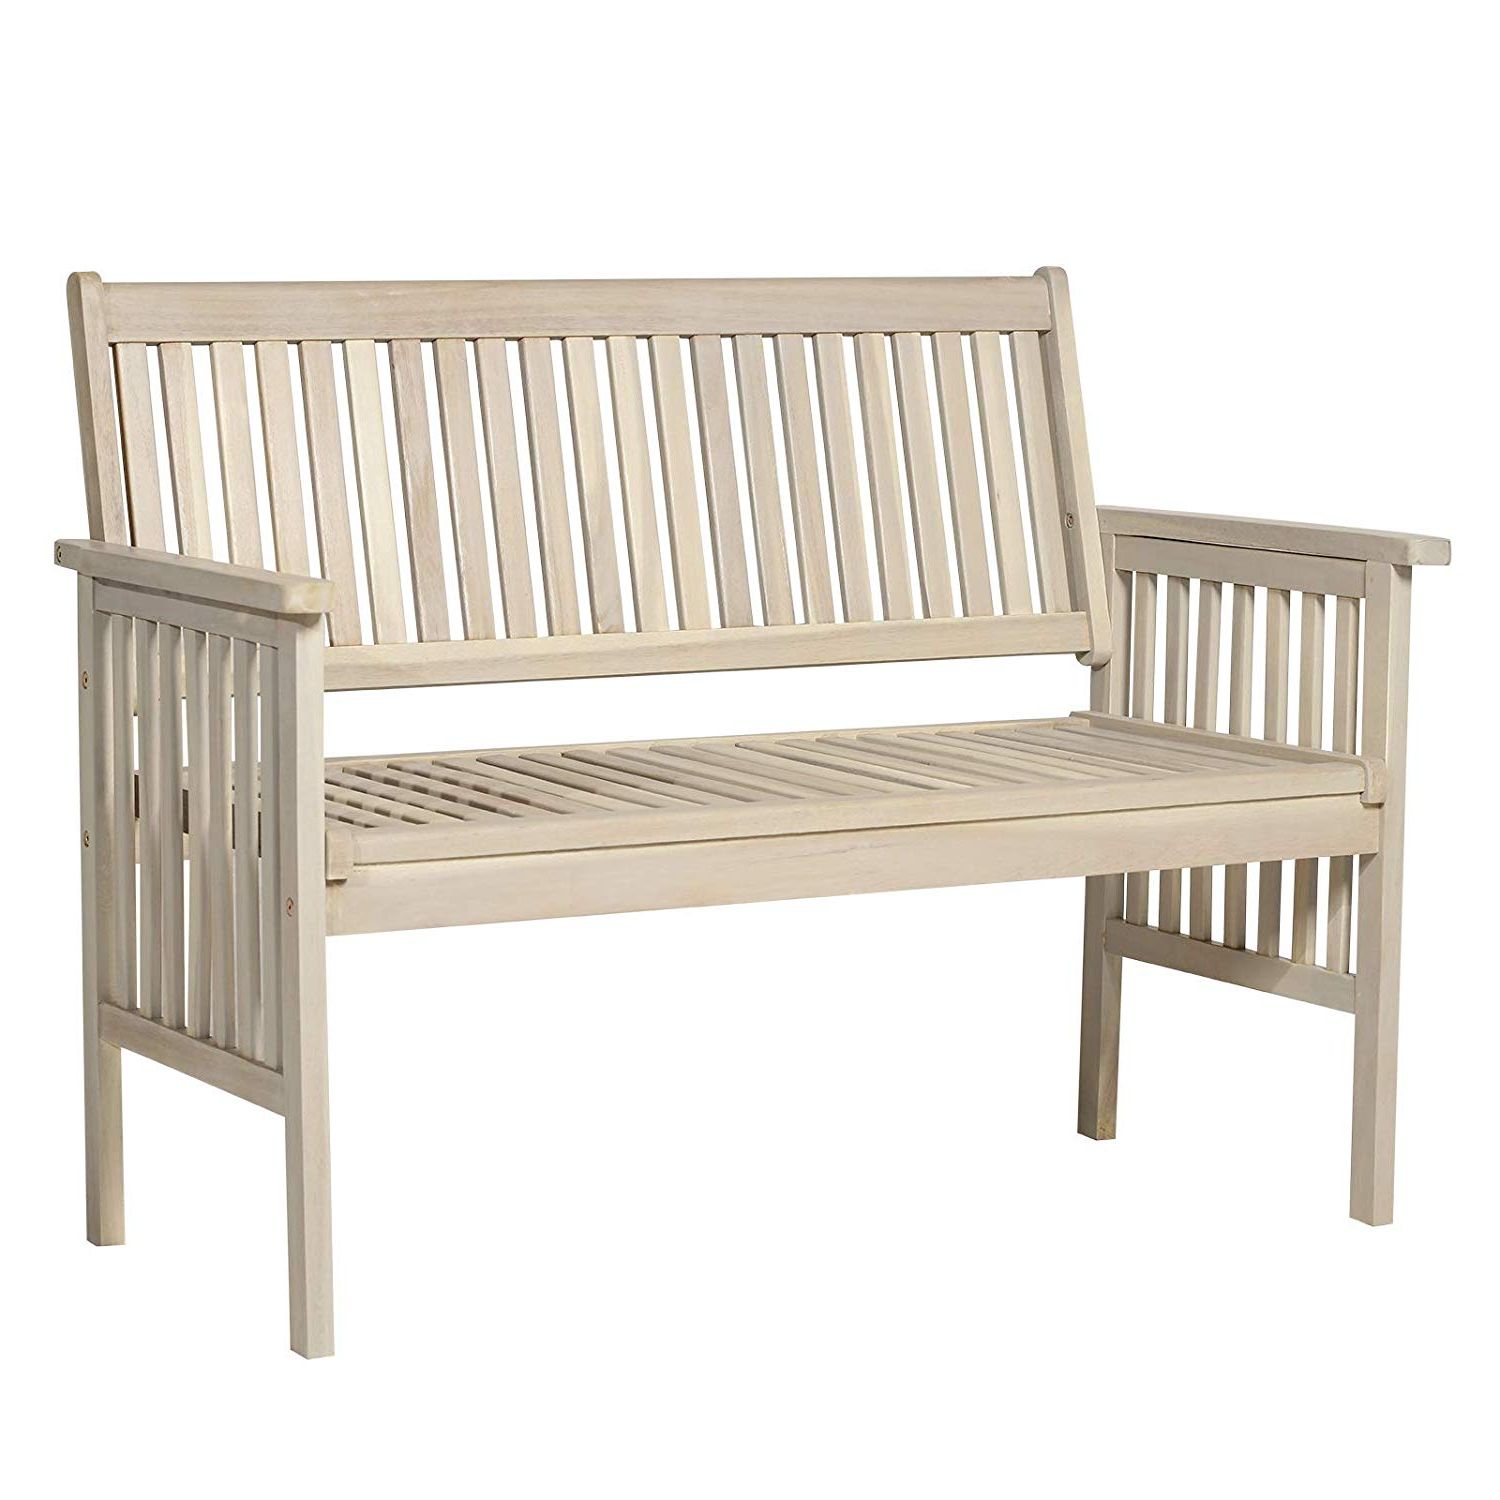 Outsunny 46” Acacia Wood Outdoor Patio Garden Bench With Regard To 2020 2 Person Light Teak Oil Wood Outdoor Swings (View 8 of 30)